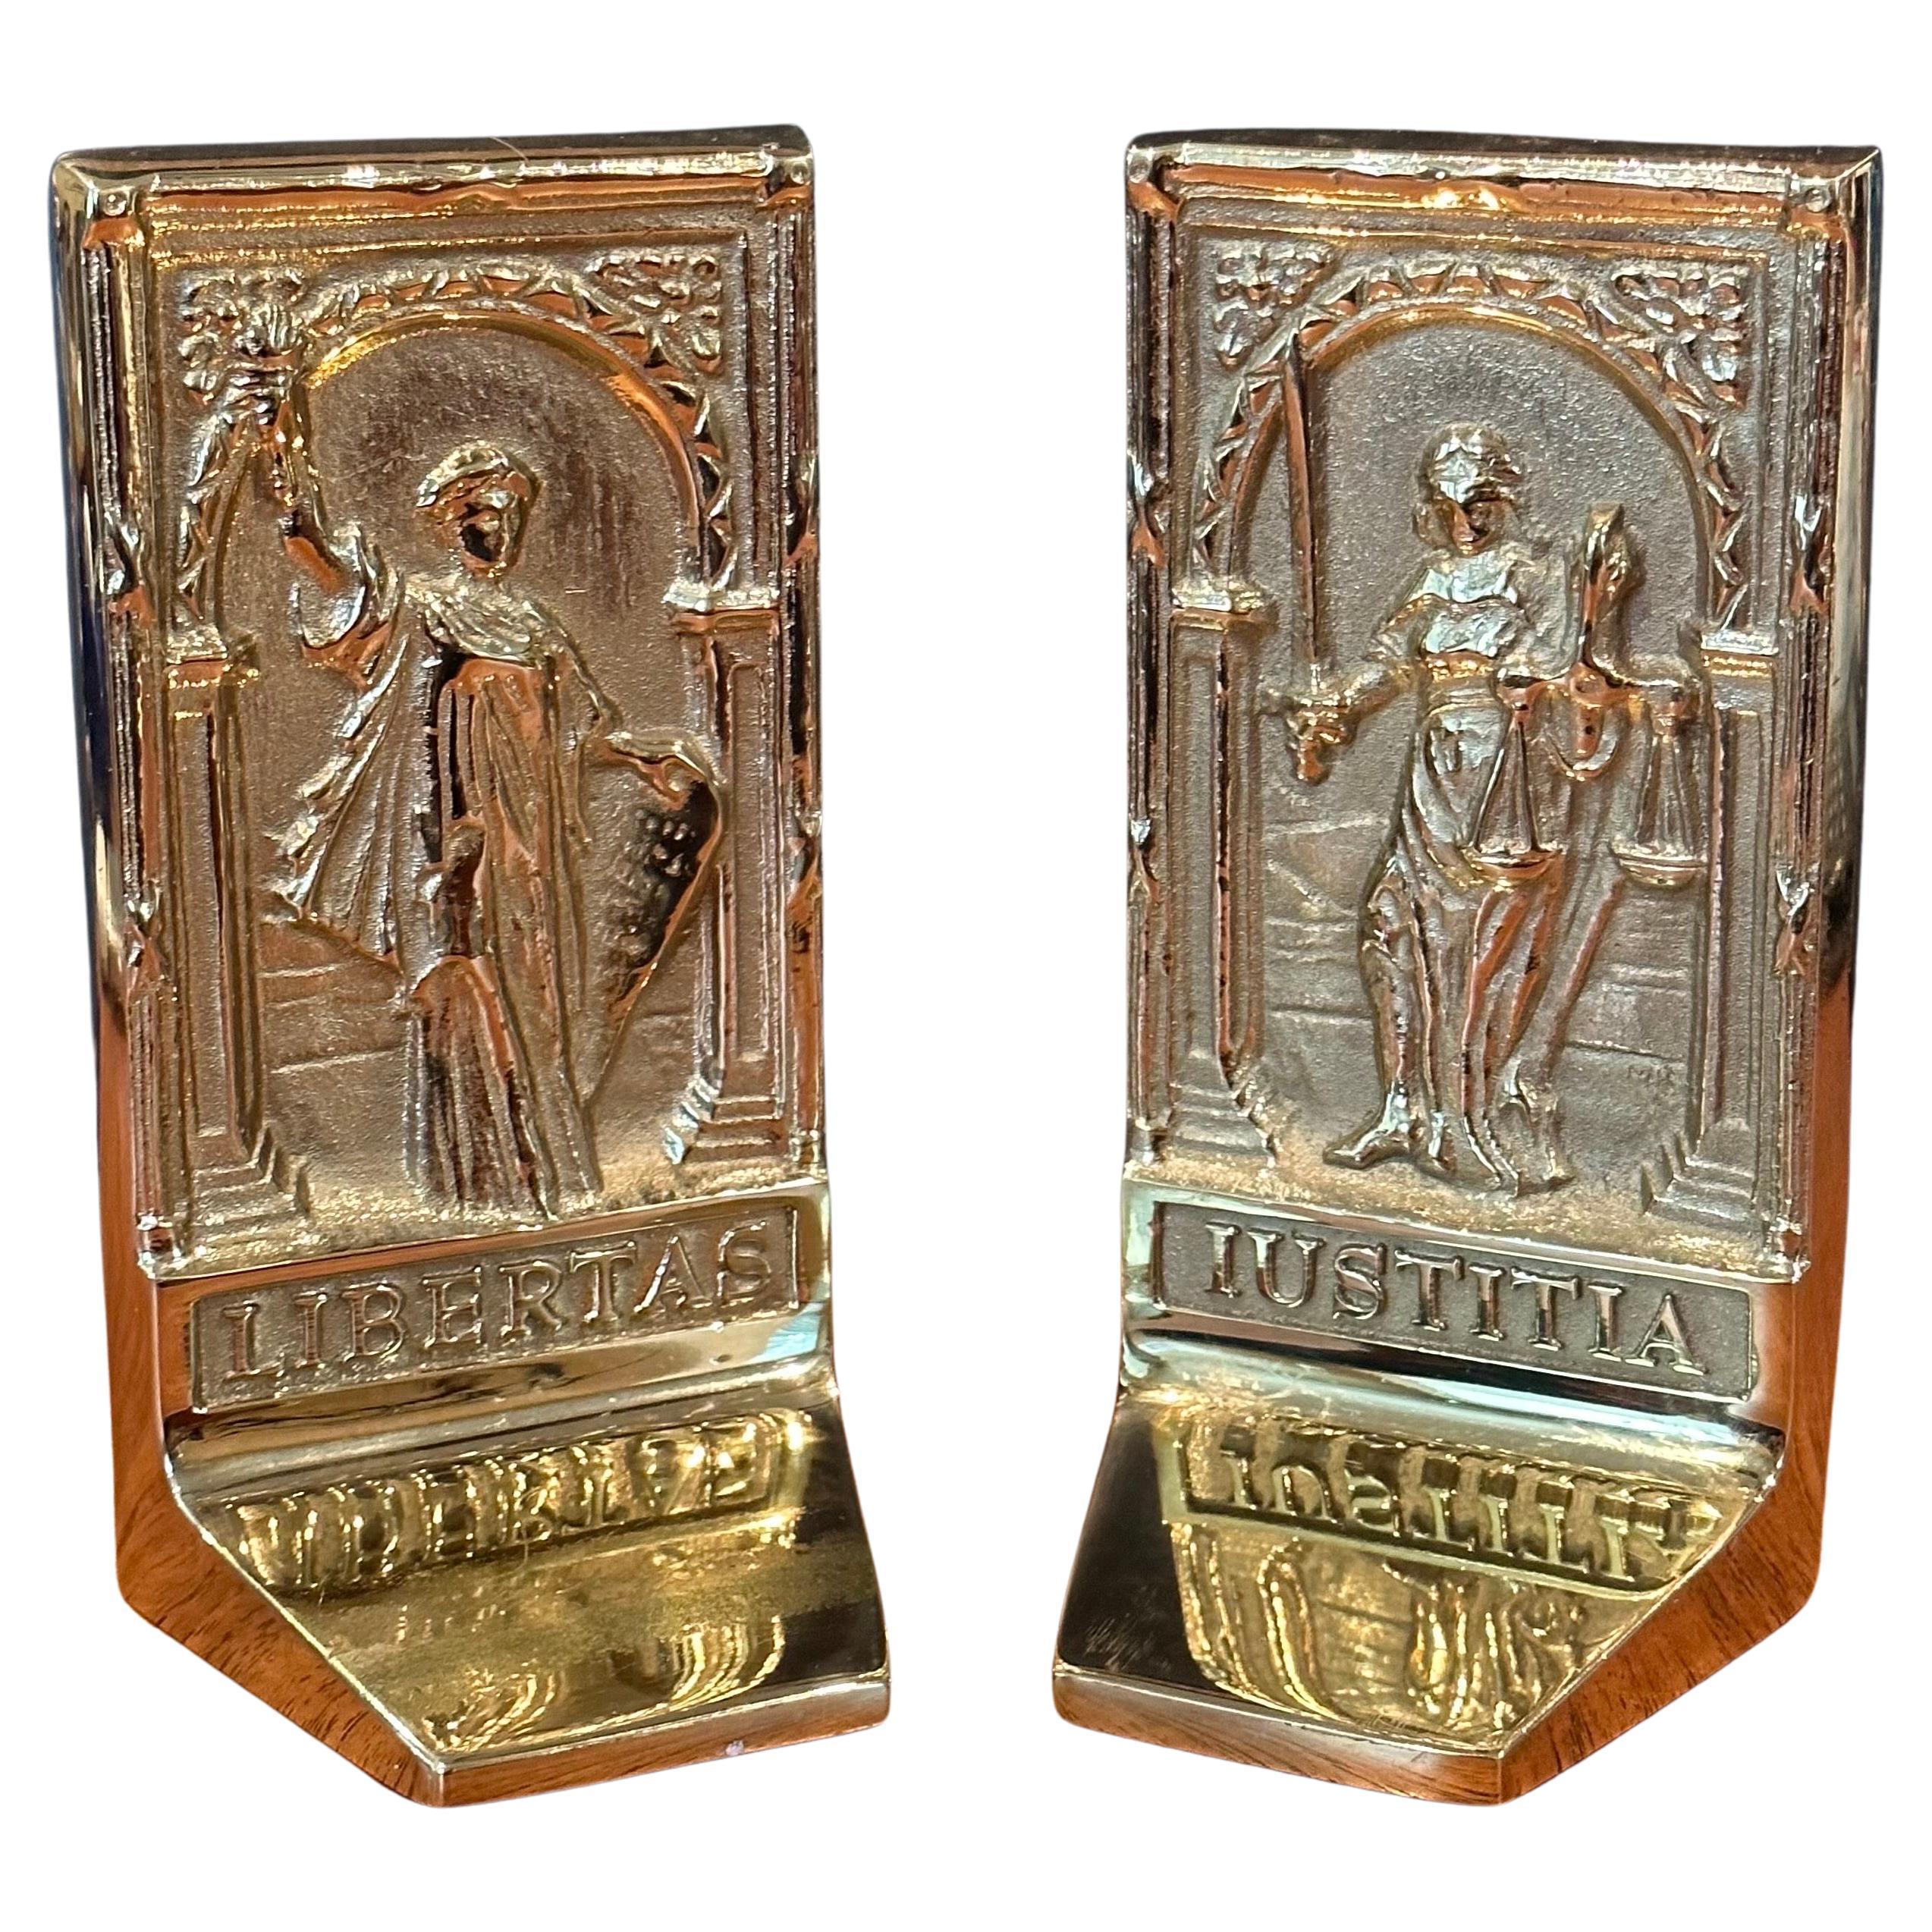 Pair of Rare Solid Brass Libertas & Justitia Bookends by Virginia Metalcrafters For Sale 10